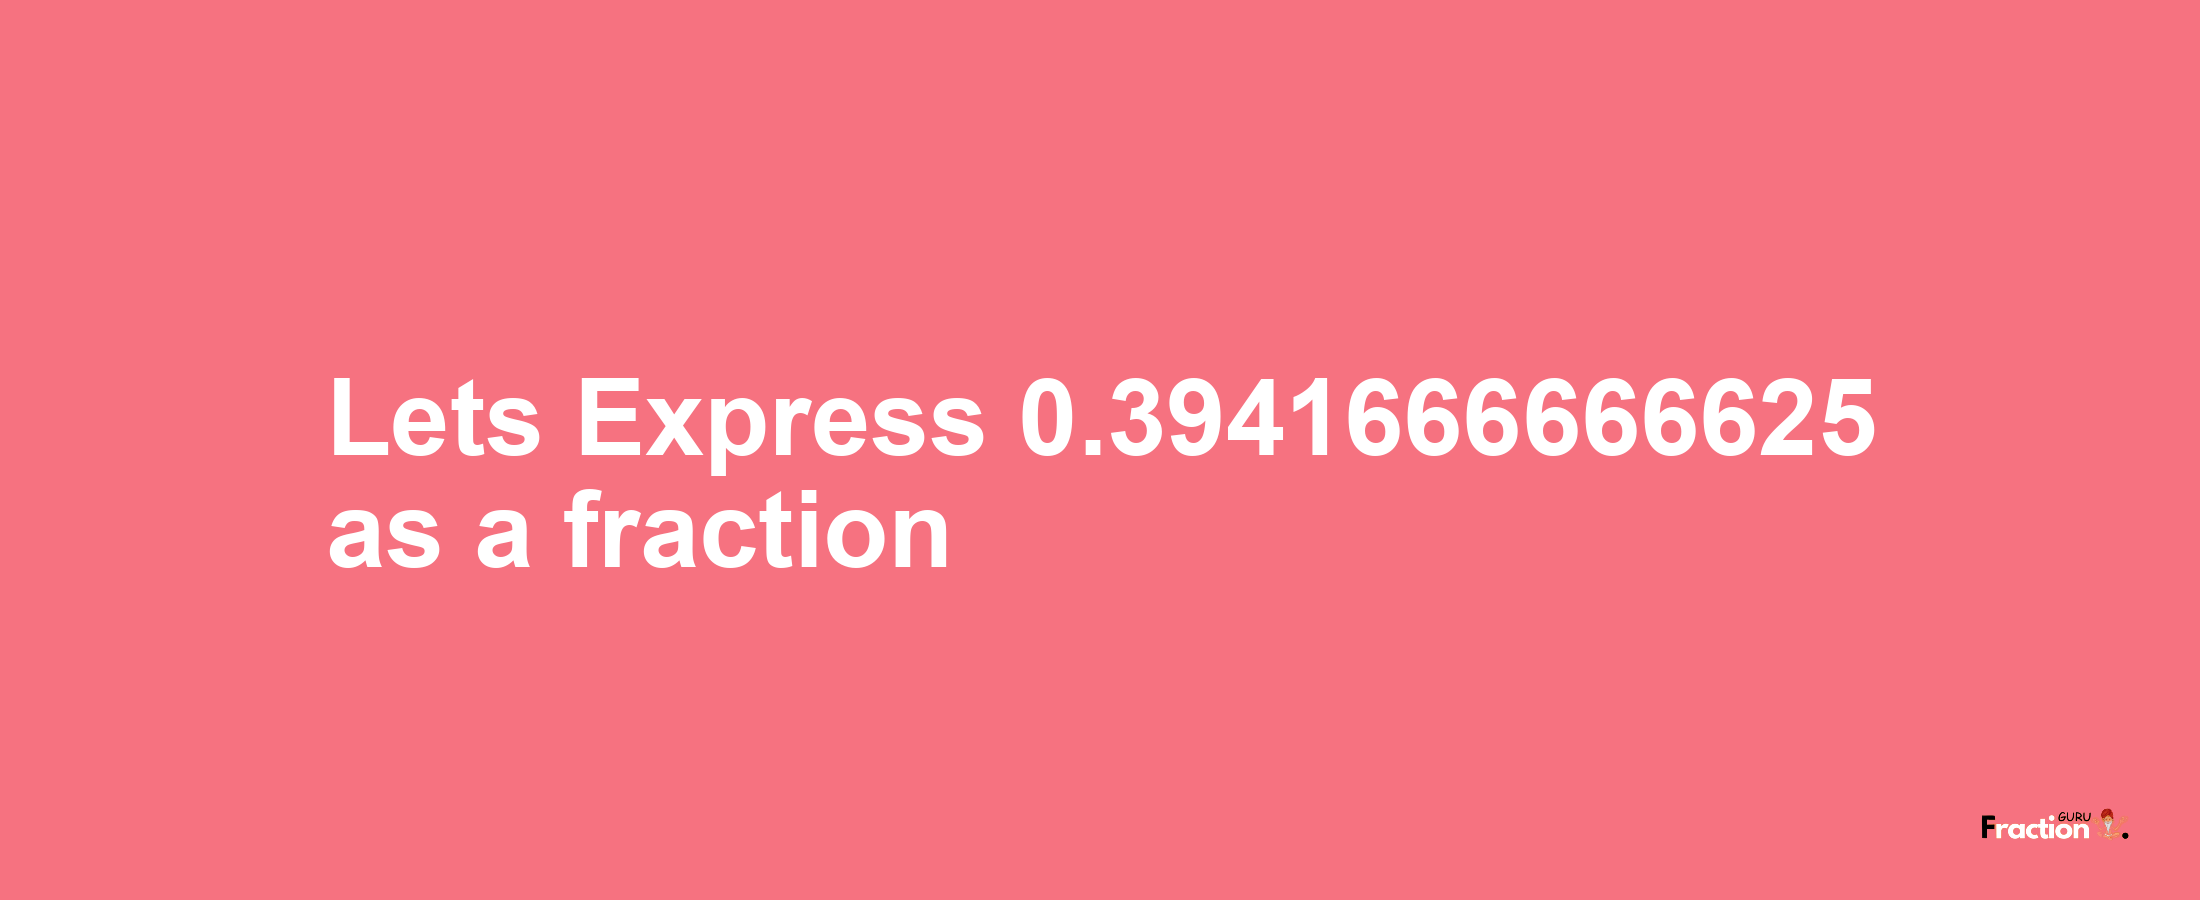 Lets Express 0.3941666666625 as afraction